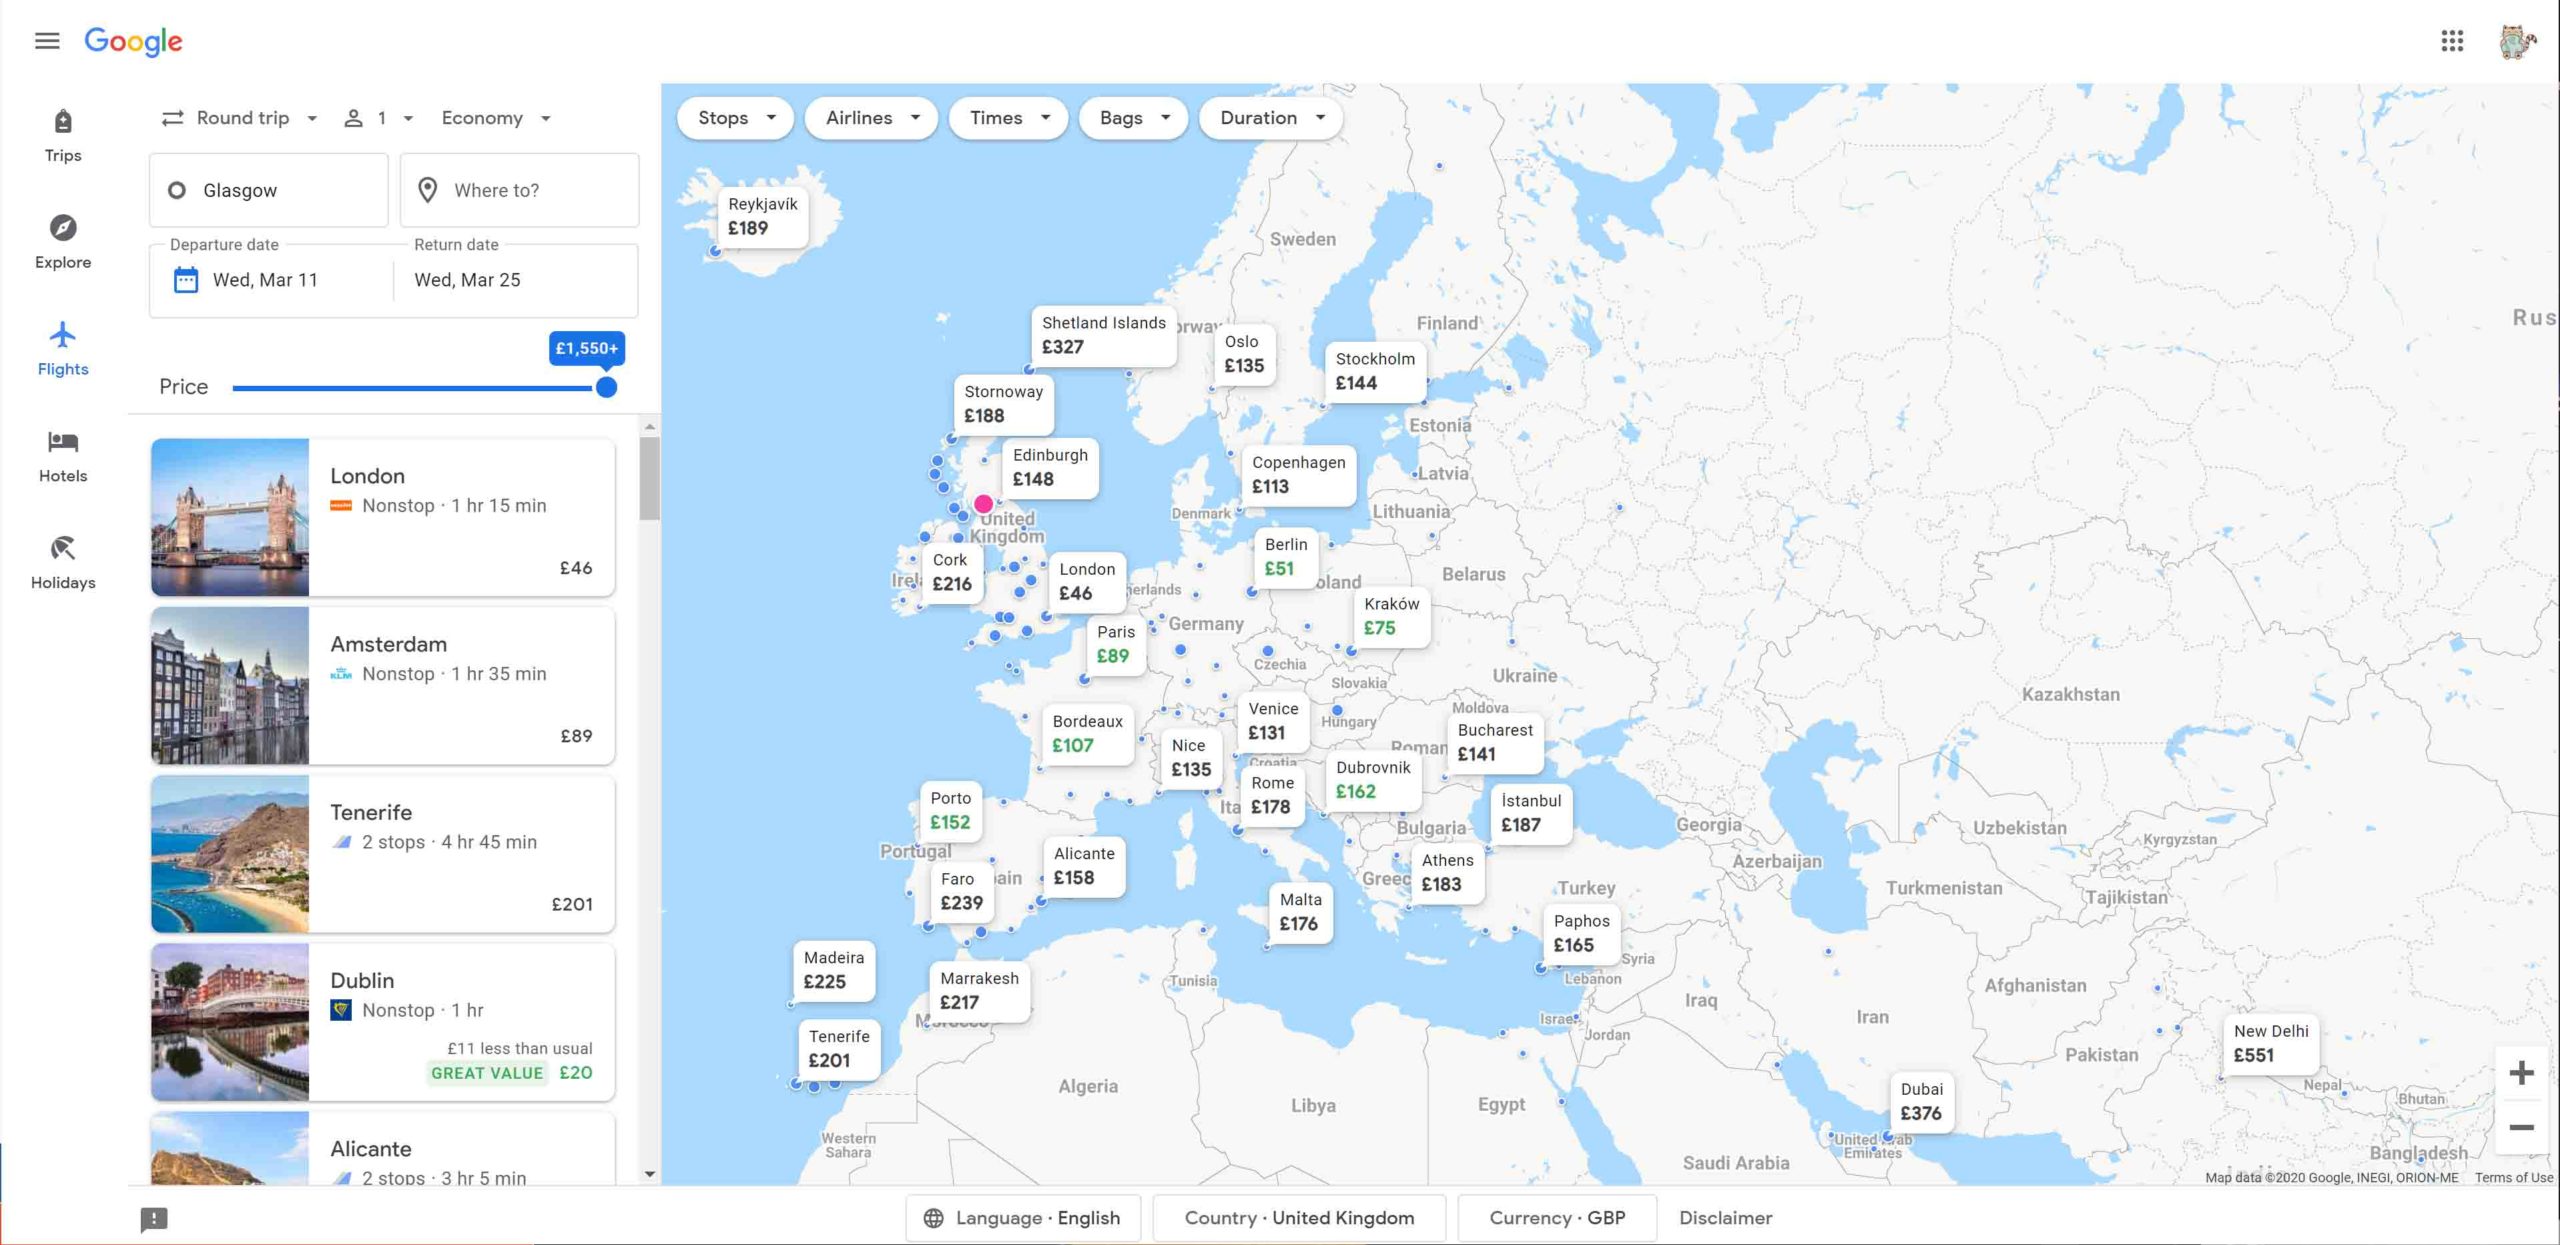 Google Maps showing prices and routes